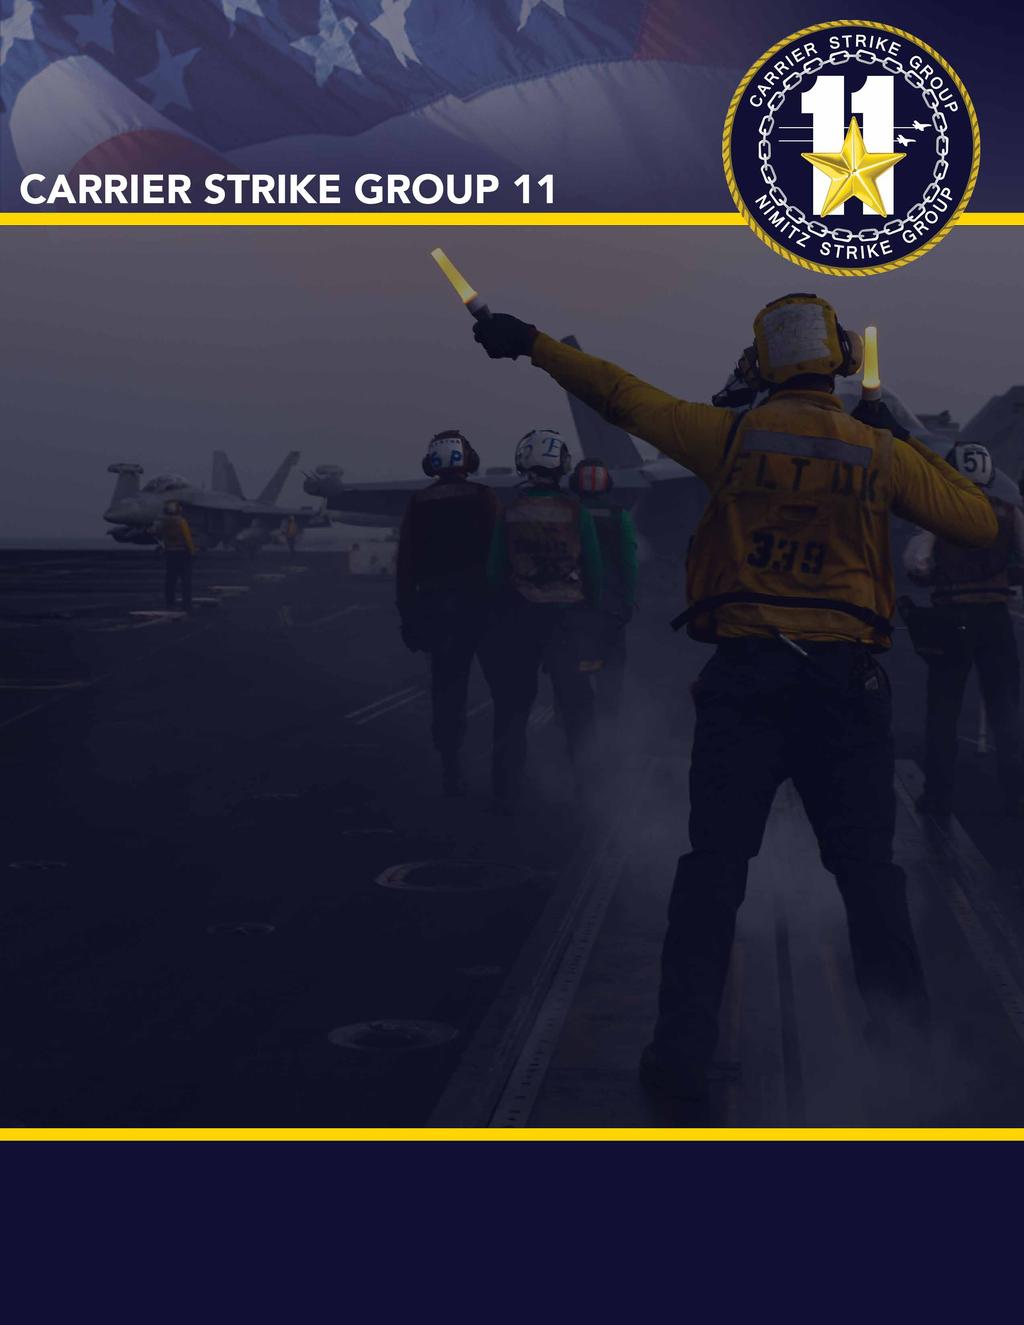 CARRIER STRIKE GROUPS A carrier strike group (CSG) can be tasked to accomplish a variety of wartime missions, as well as missions other than war.